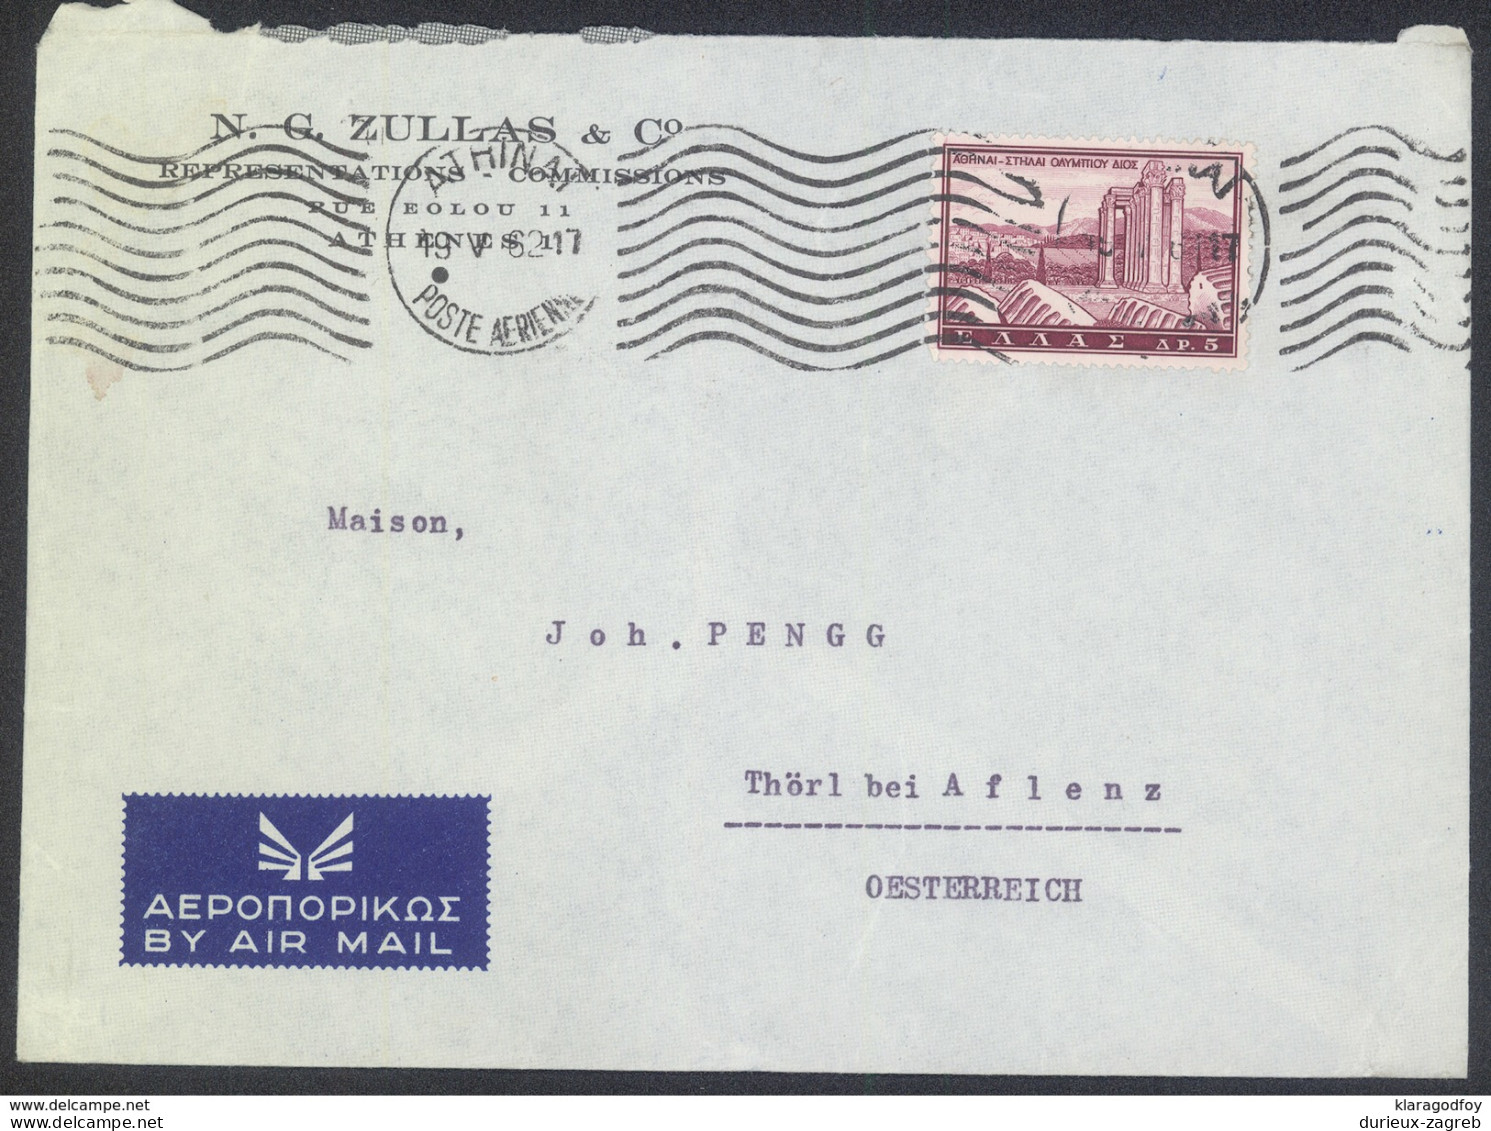 Greece, N. G. Zulas & Co Company Airmail Letter Cover Travelled 1962 Athina Pmk B170410 - Briefe U. Dokumente